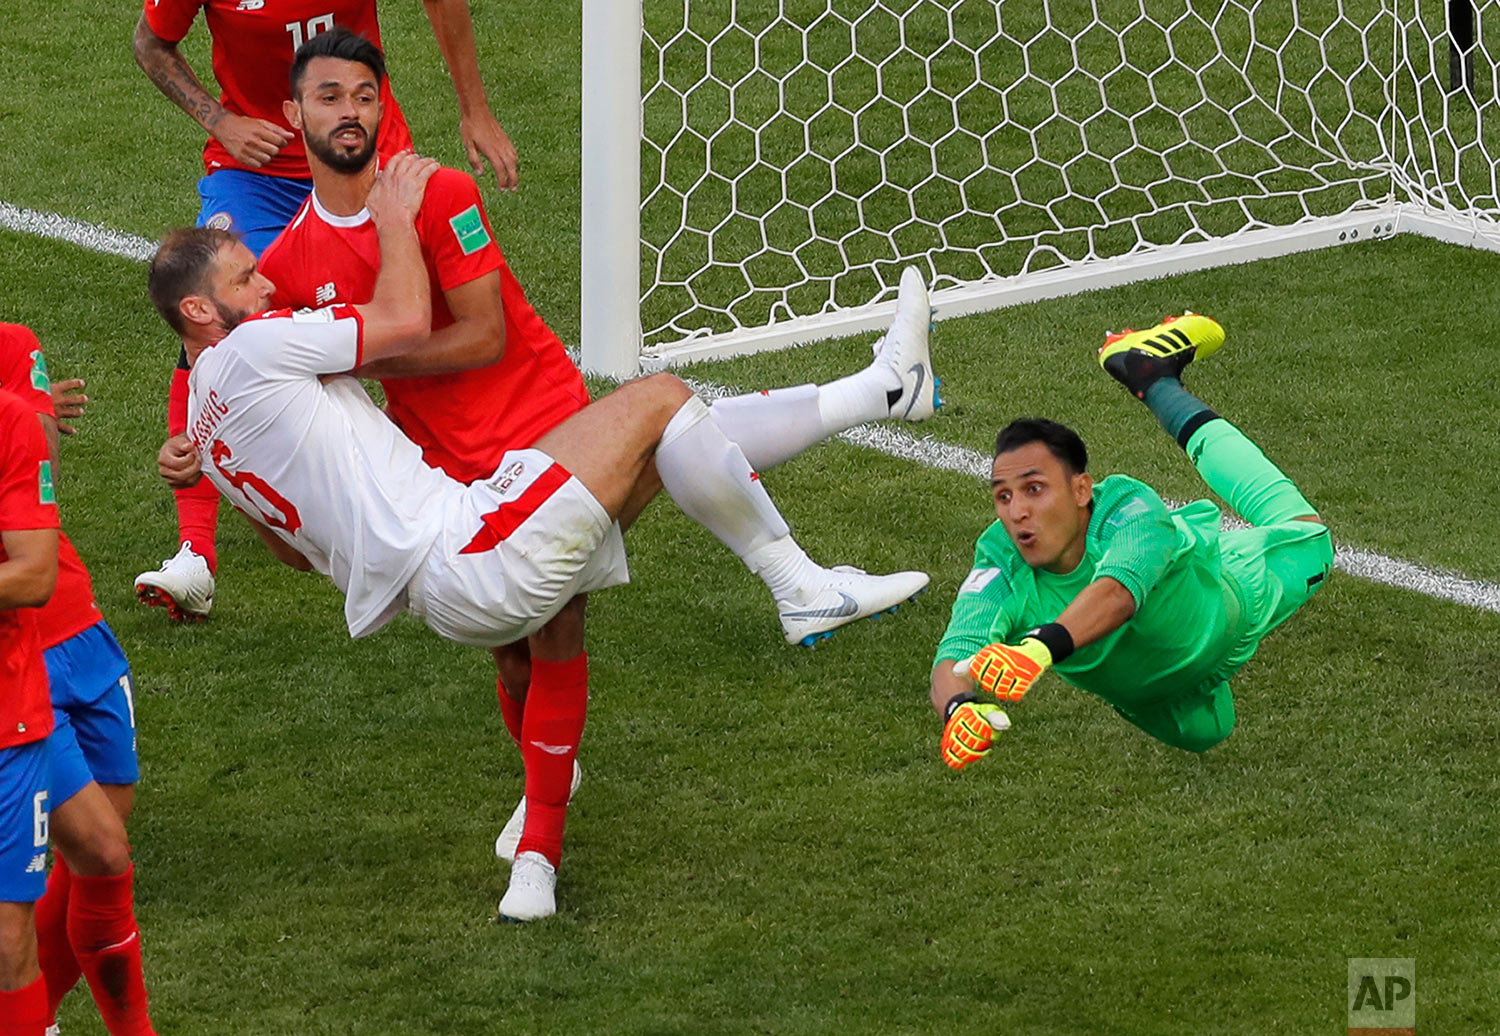  Serbia's Branislav Ivanovic, left, tries to score past Costa Rica goalkeeper Keylor Navas during the group E match between Costa Rica and Serbia at the 2018 soccer World Cup in the Samara Arena in Samara, Russia, Sunday, June 17, 2018. (AP Photo/Vad